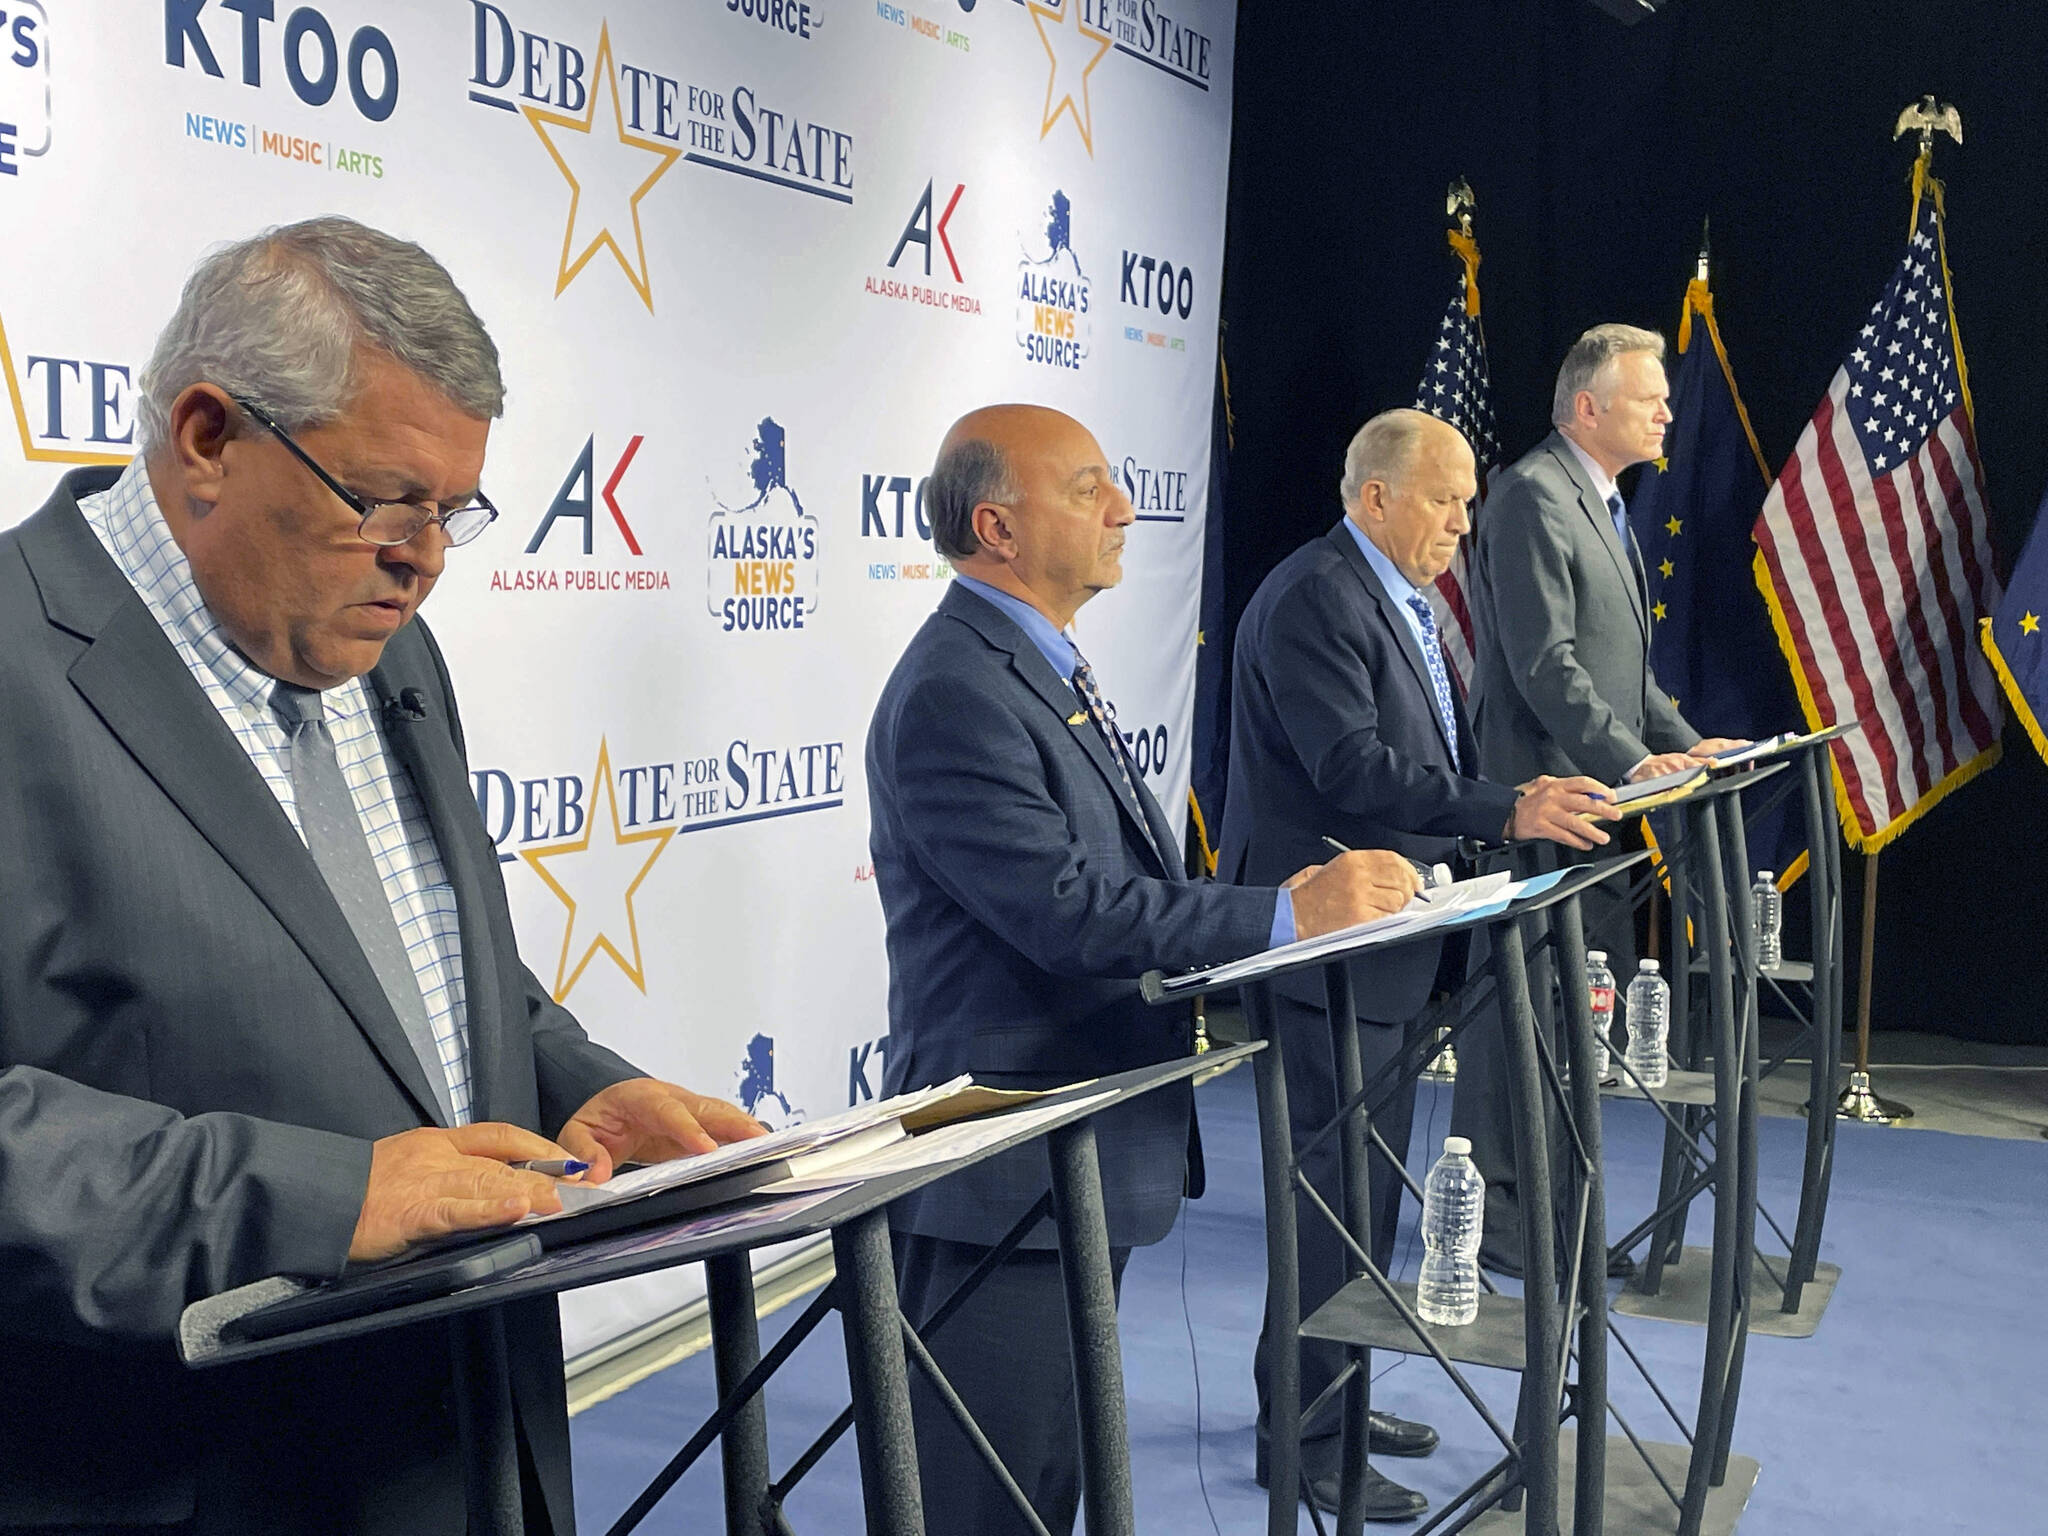 The four candidates for Alaska governor are shown preparing for a televised debate Wednesday in Anchorage. From left are Republican Charlie Pierce; Democrat Les Gara; former Gov. Bill Walker, an independent; and Gov. Mike Dunleavy, a Republican. (AP Photo/Mark Thiessen)